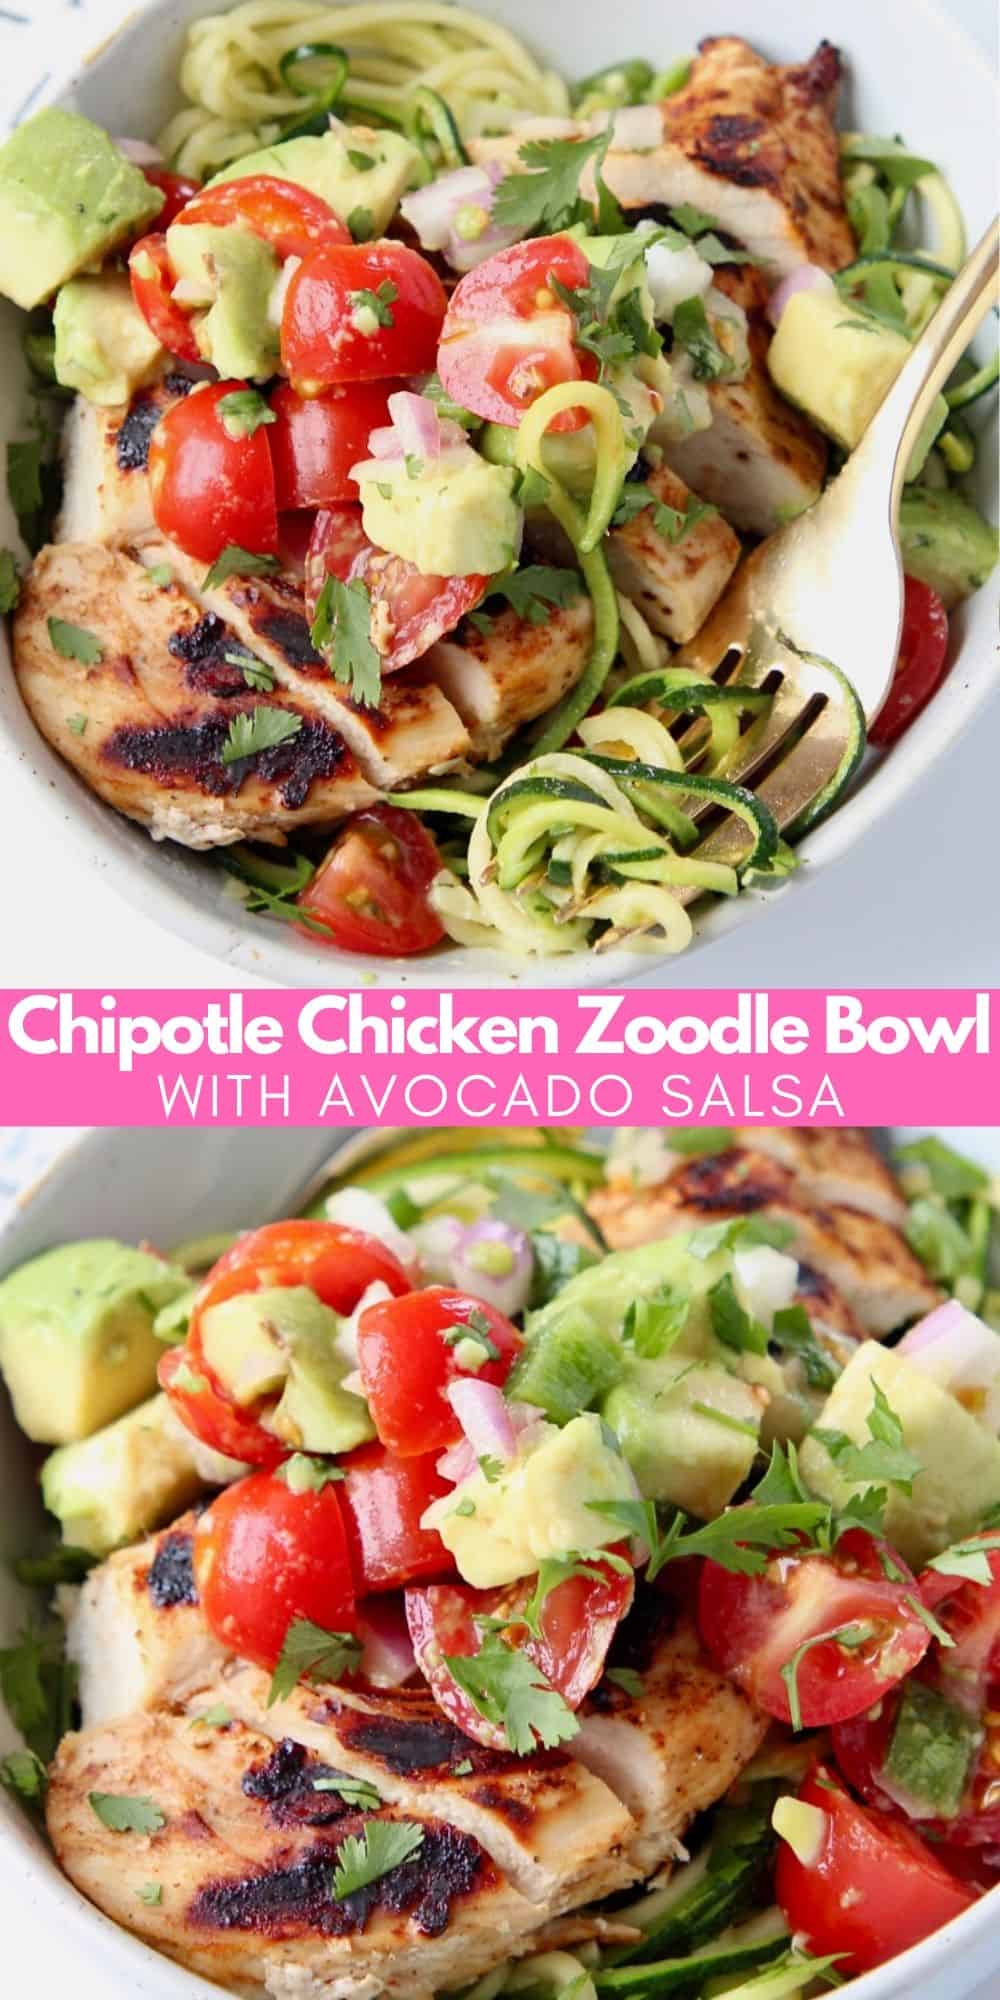 Chipotle Chicken Bowl with Avocado Salsa - Bowls Are The New Plates